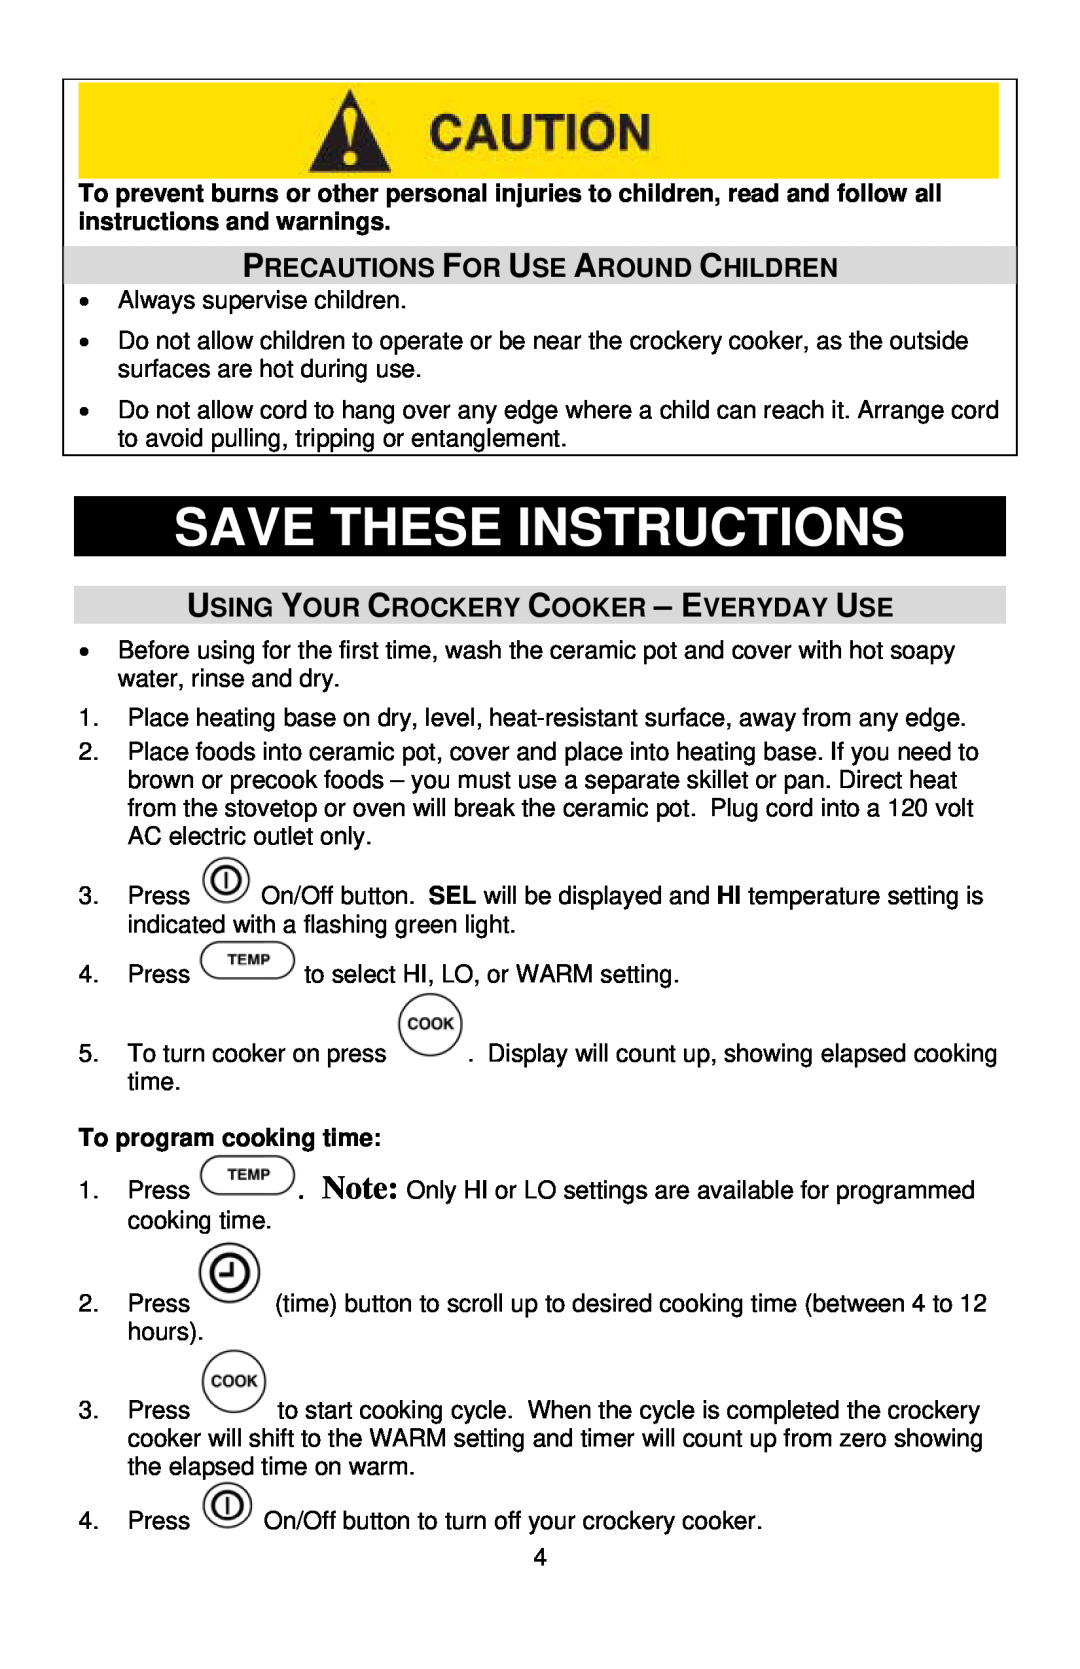 West Bend 6-QUART ELECTRONIC CROCKERYTM COOKER Save These Instructions, Precautions For Use Around Children 